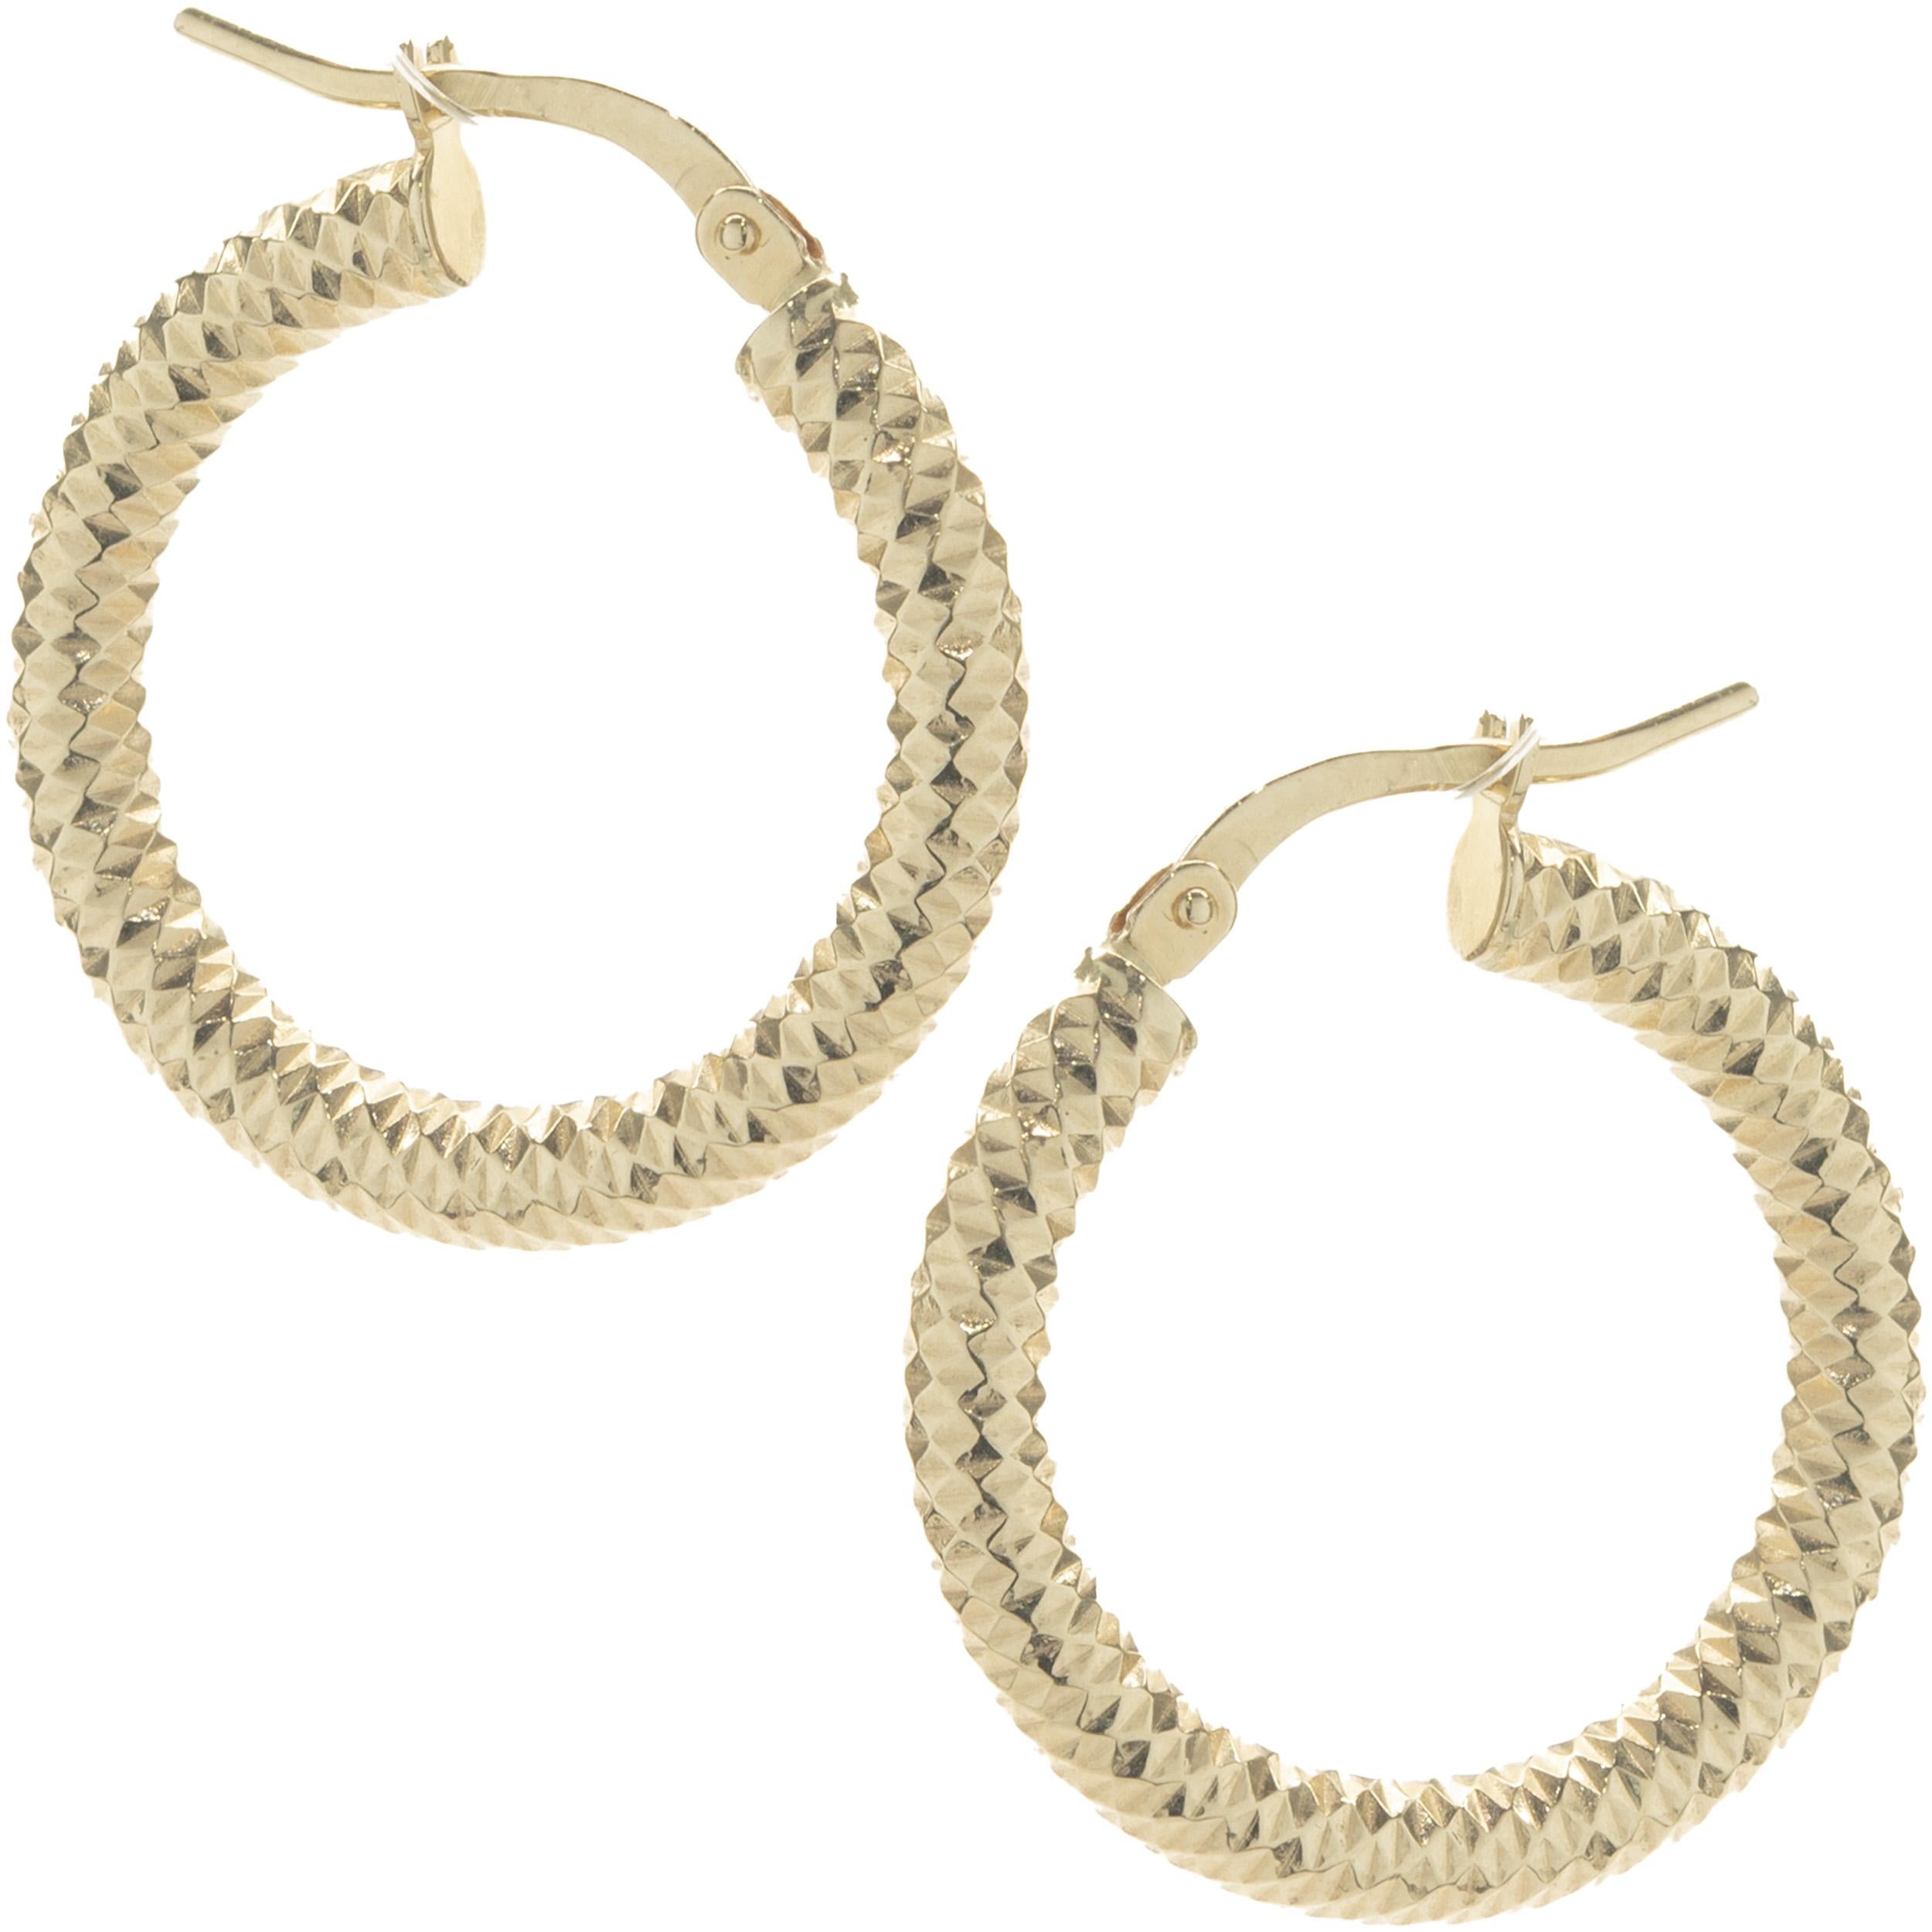 Material: 14K yellow gold
Dimensions: earrings measure 22mm in length
Weight:  1.96 grams
